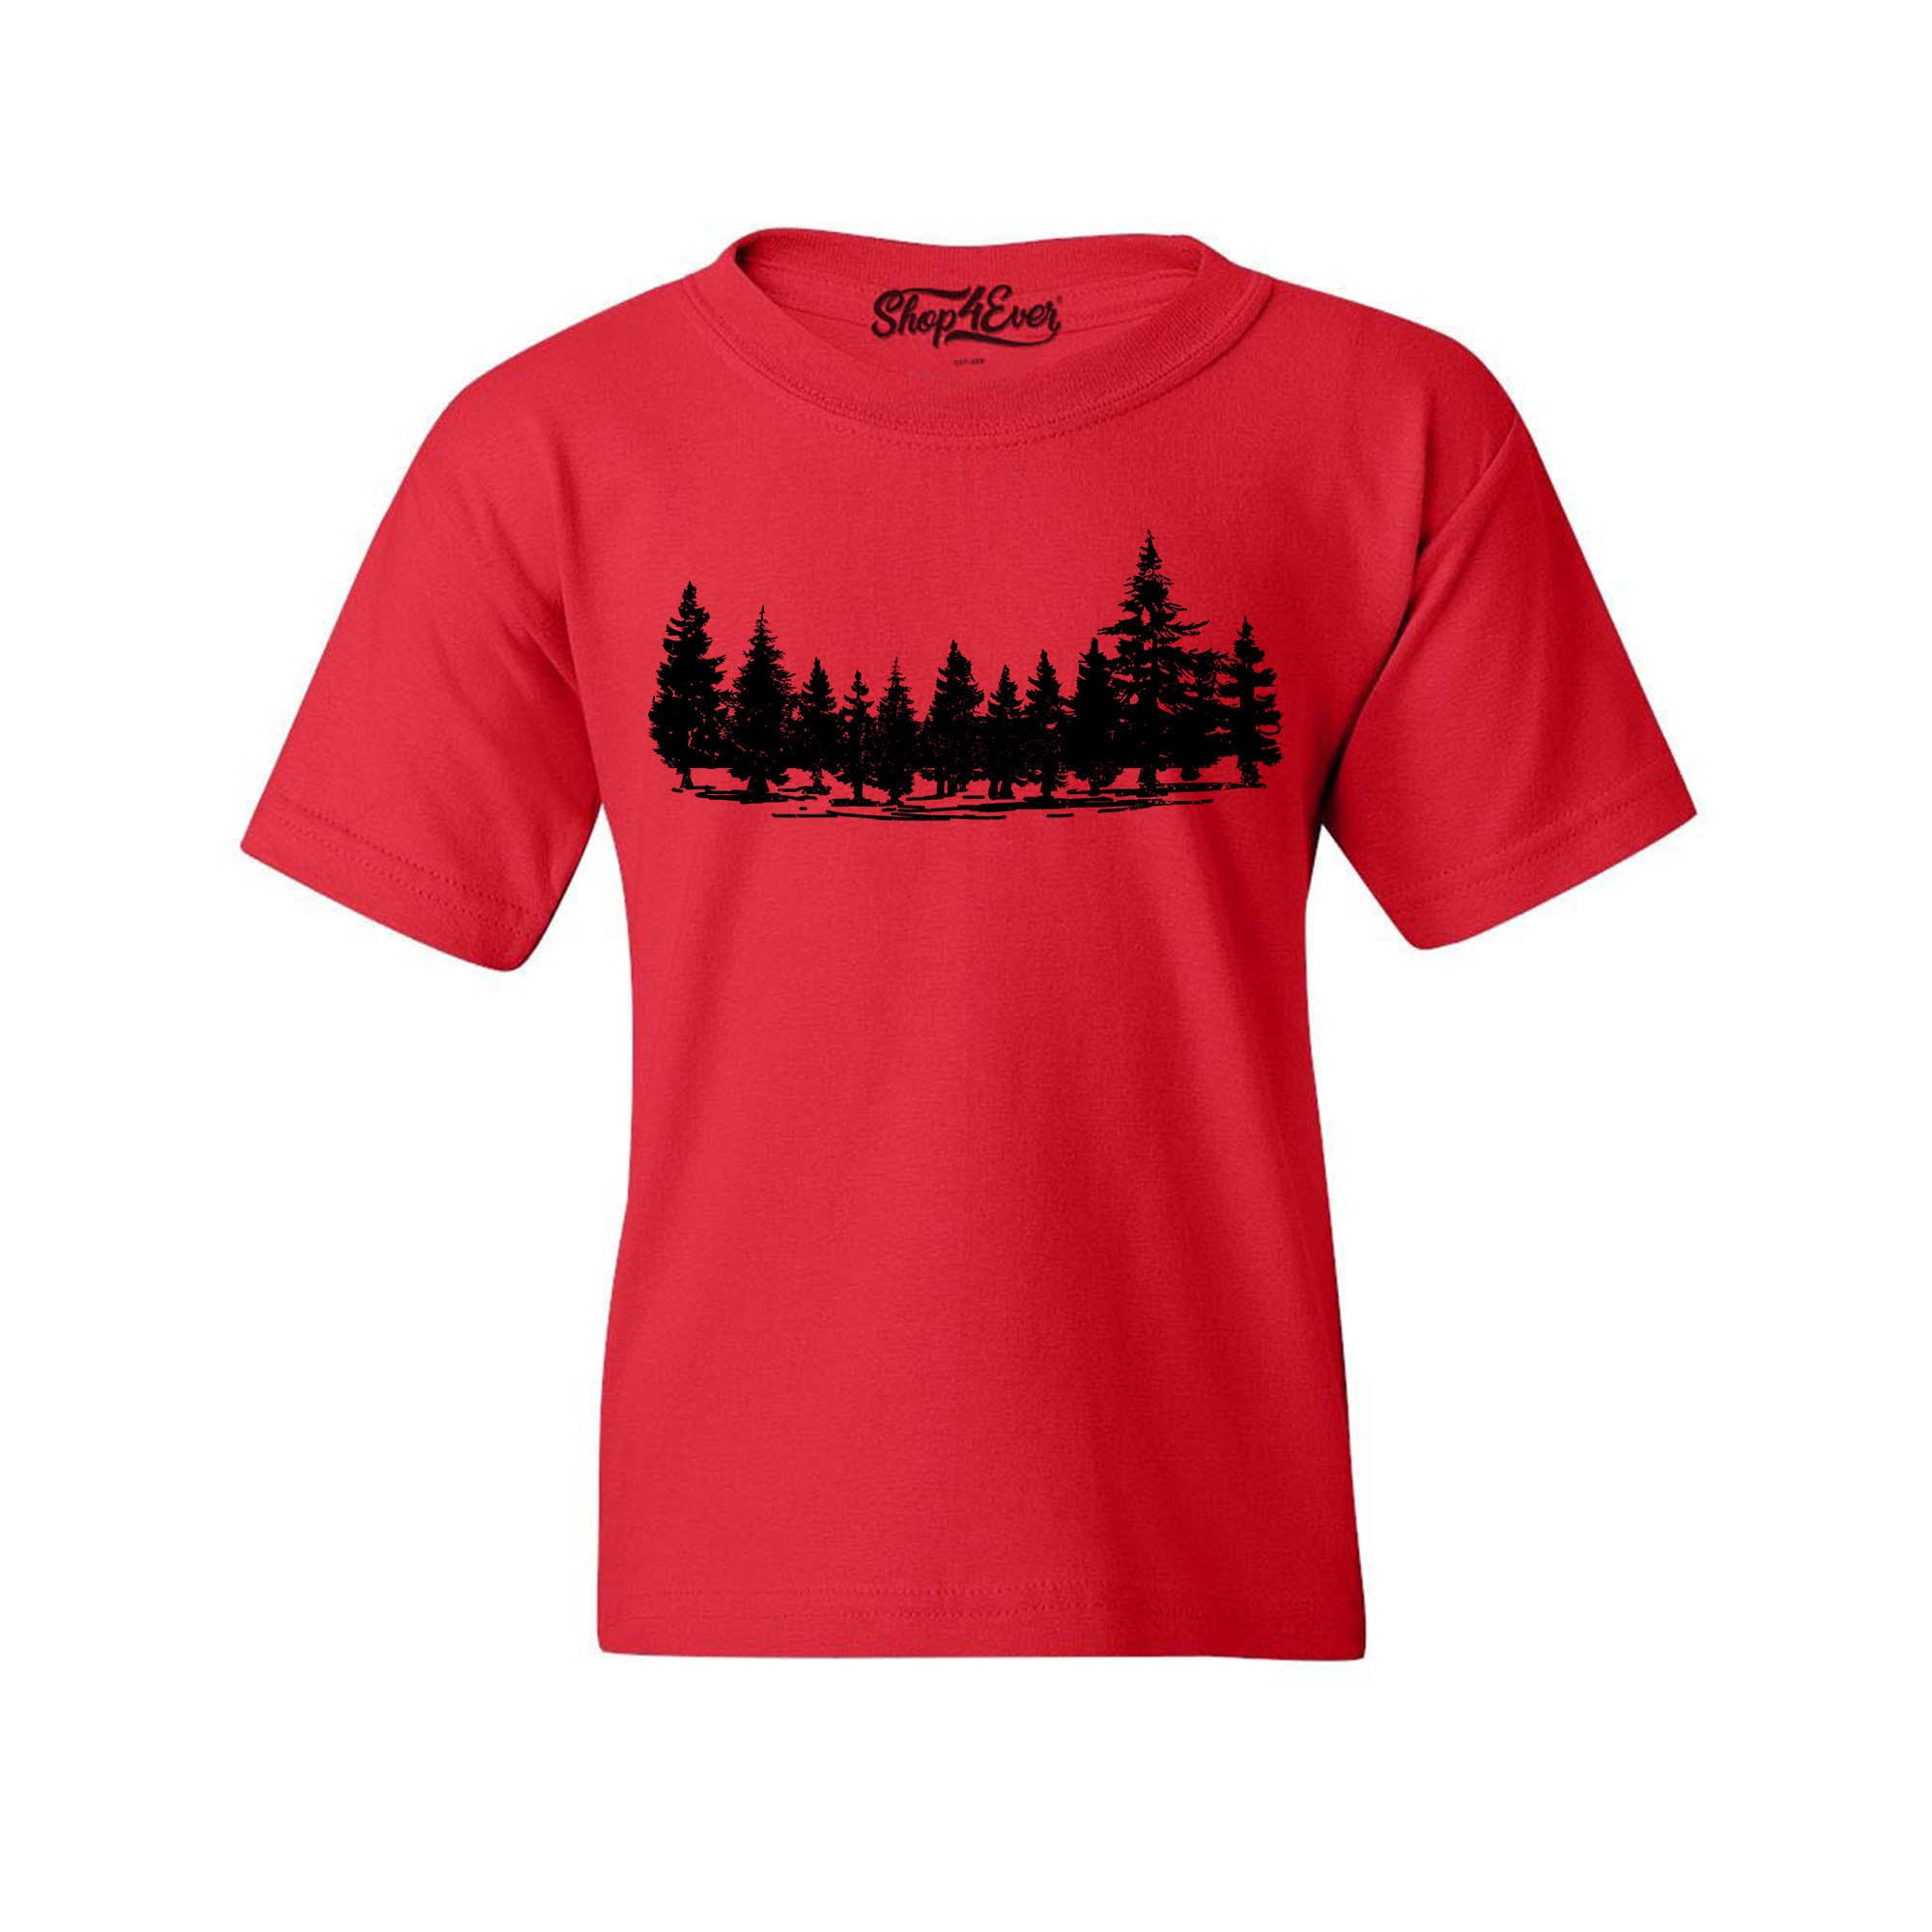 Forest Trees Nature Mountains Wildlife Child's T-Shirt Kids Tee